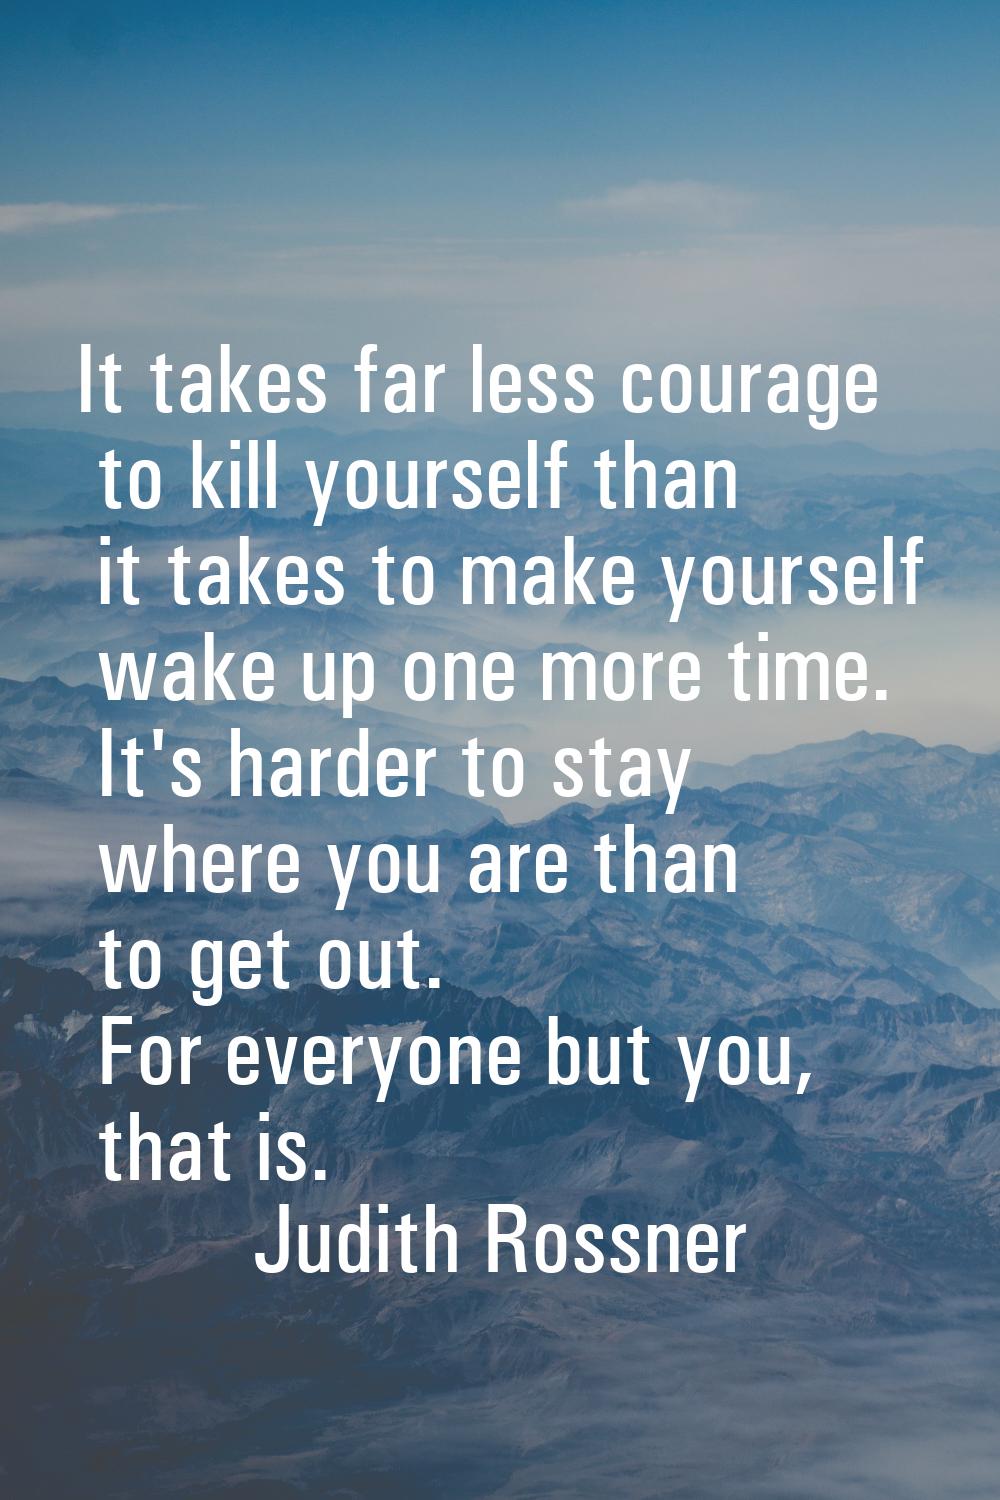 It takes far less courage to kill yourself than it takes to make yourself wake up one more time. It